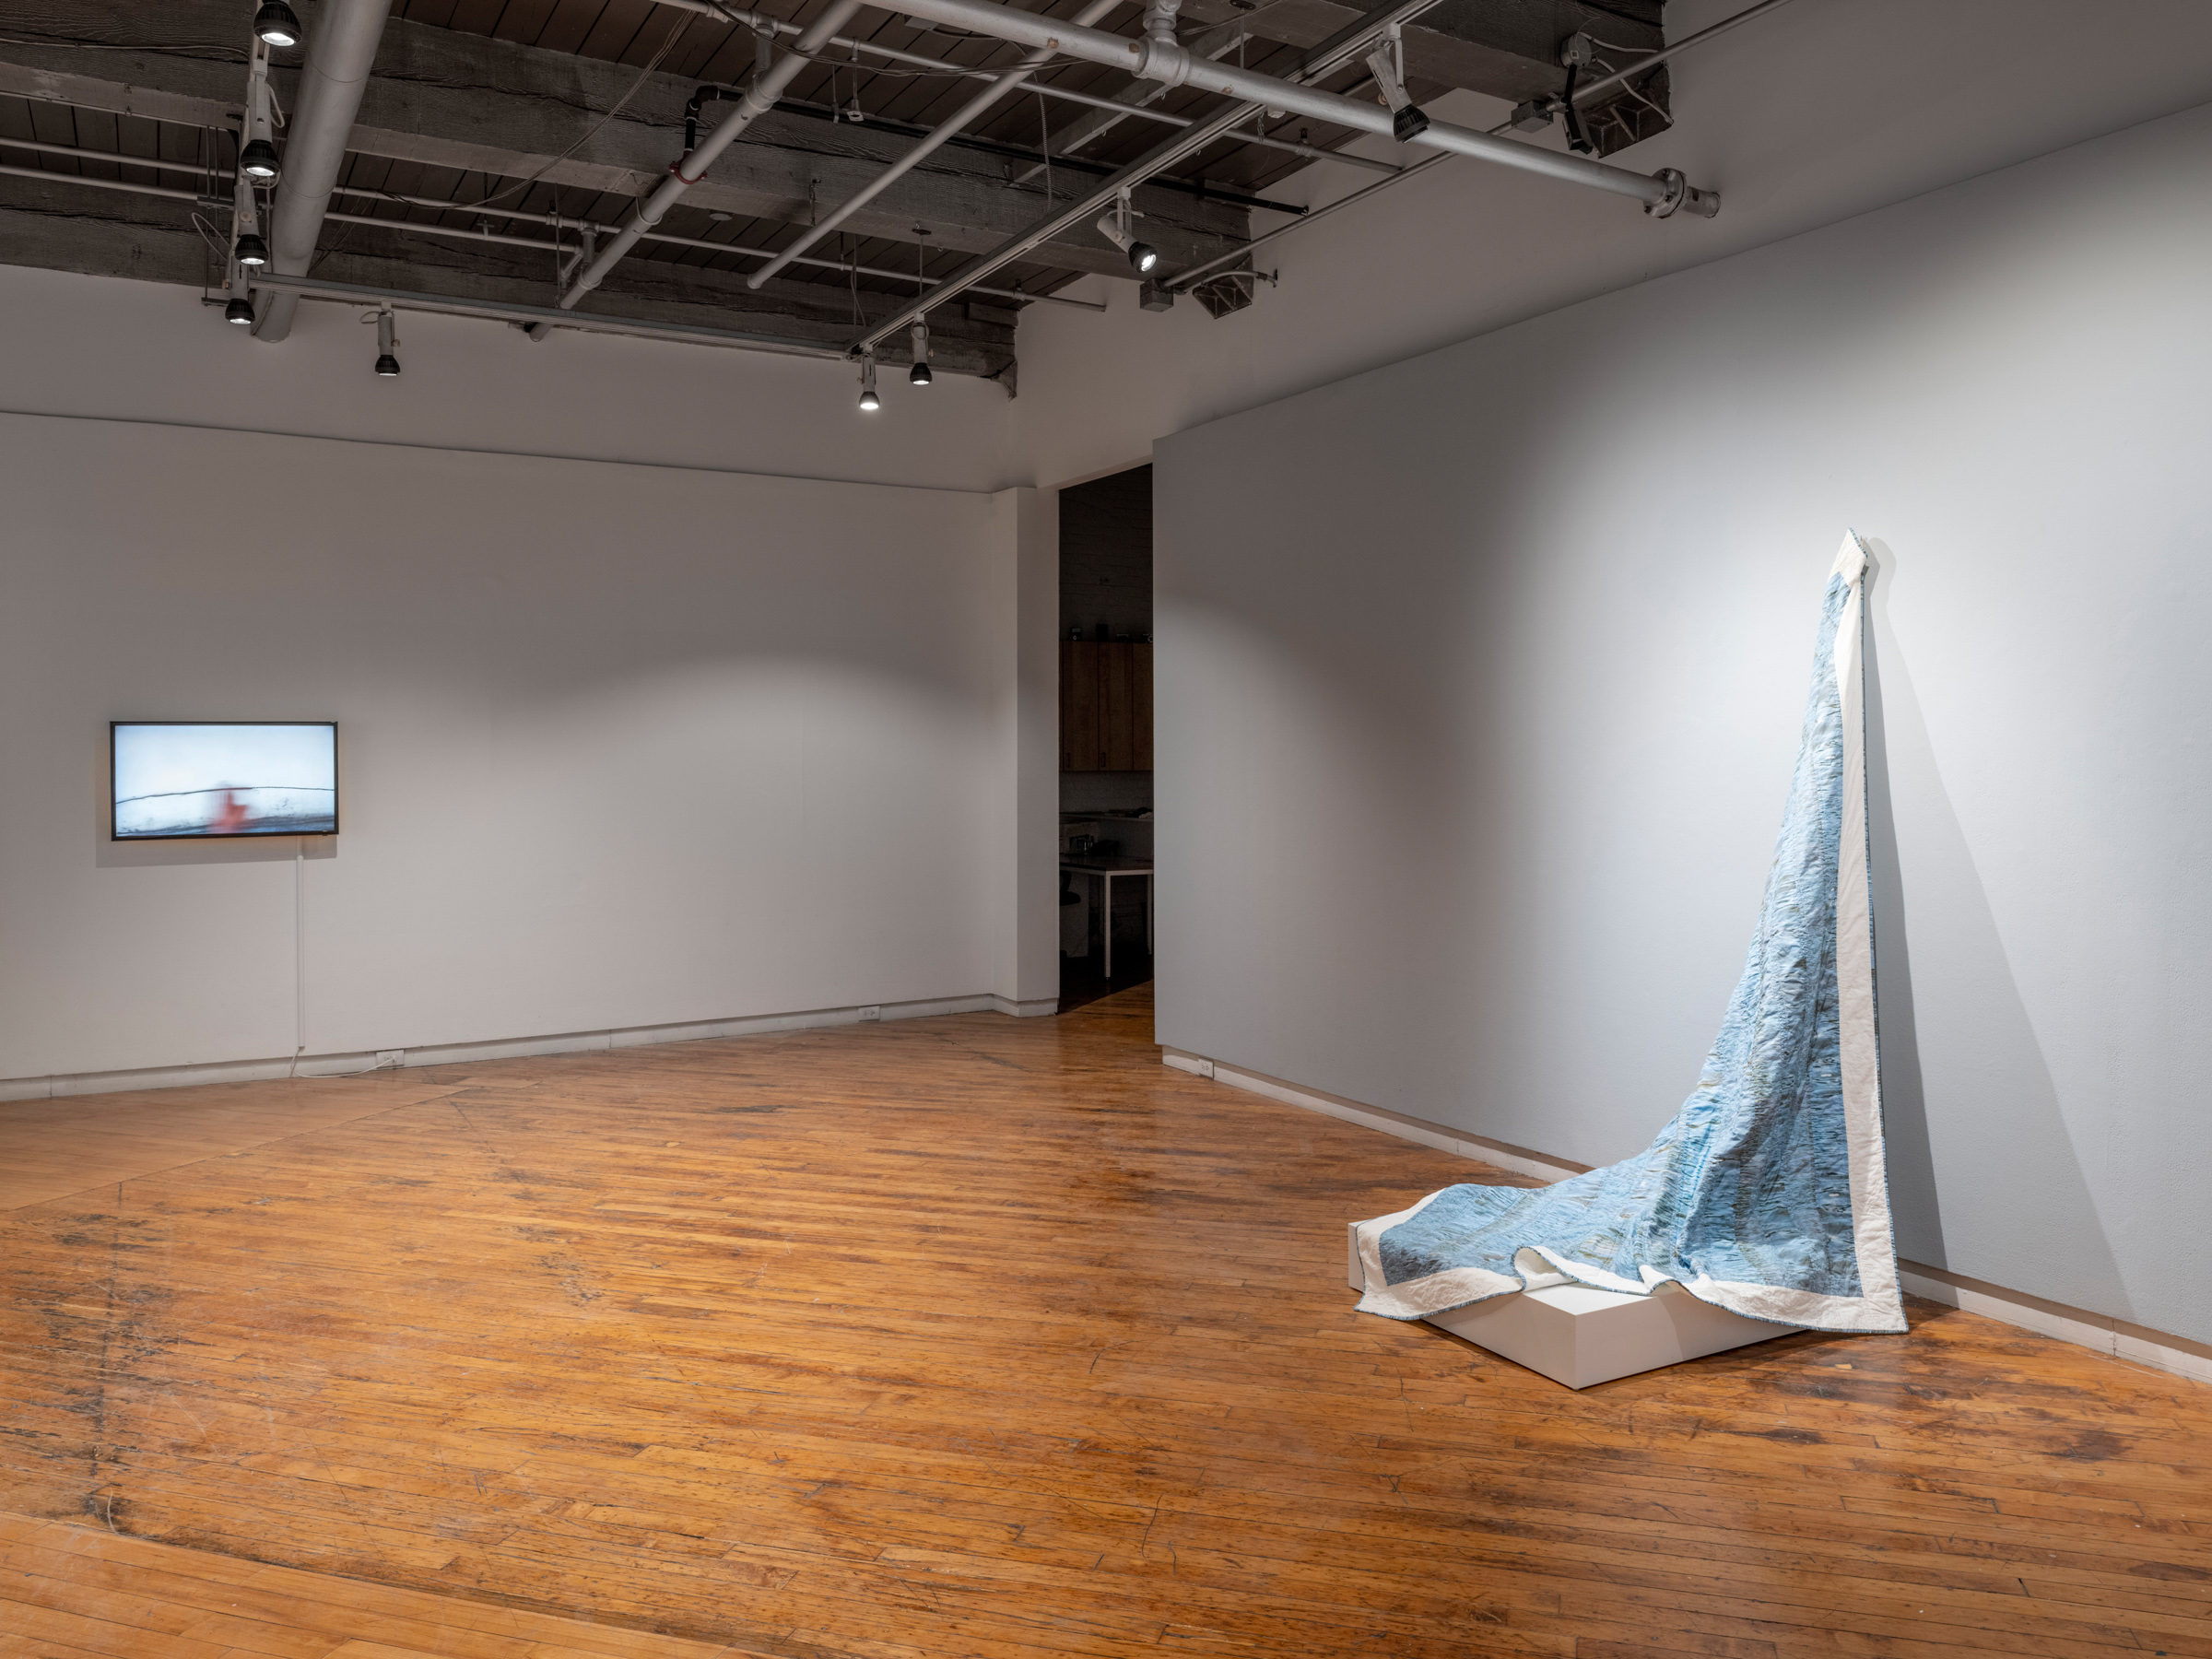     Suzanne Morrissette with Clayton Morrissette, What does good work look like?, installation view, Gallery 44 Centre for Contemporary Photography, 2022. Courtesy of the artist and Gallery 44. Photo: Darren Rigo

